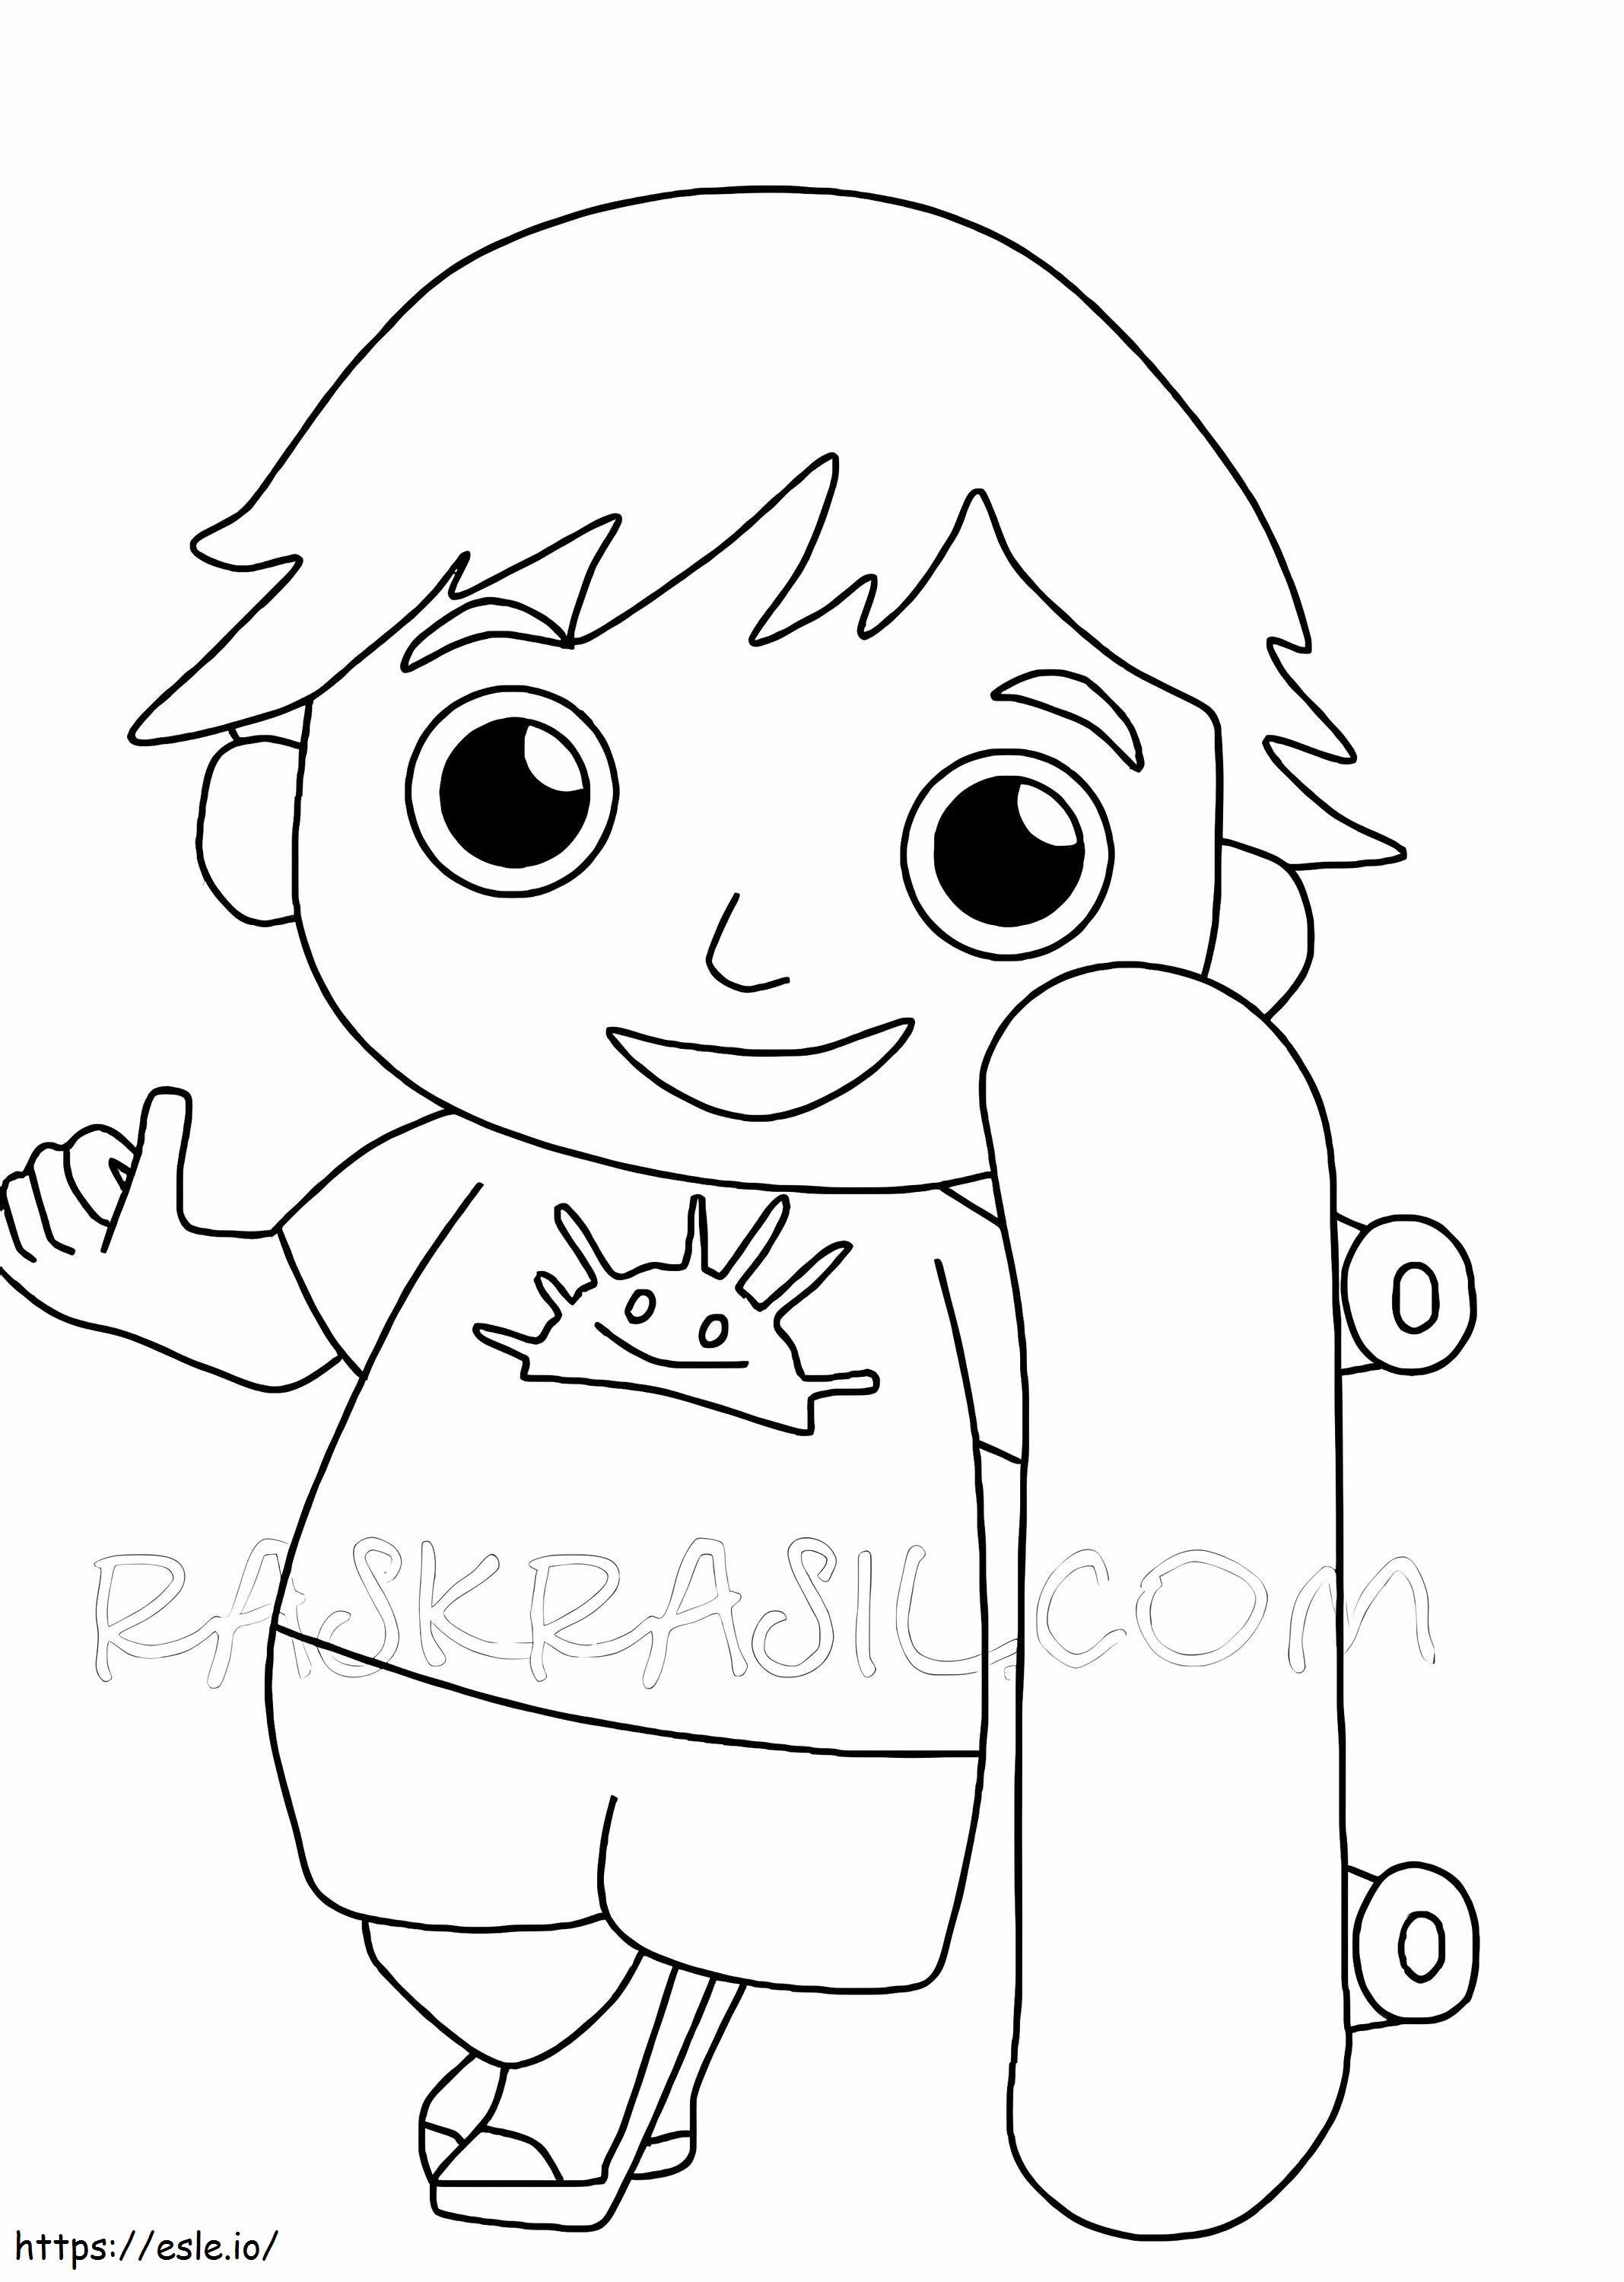 Ryan With Skateboard coloring page